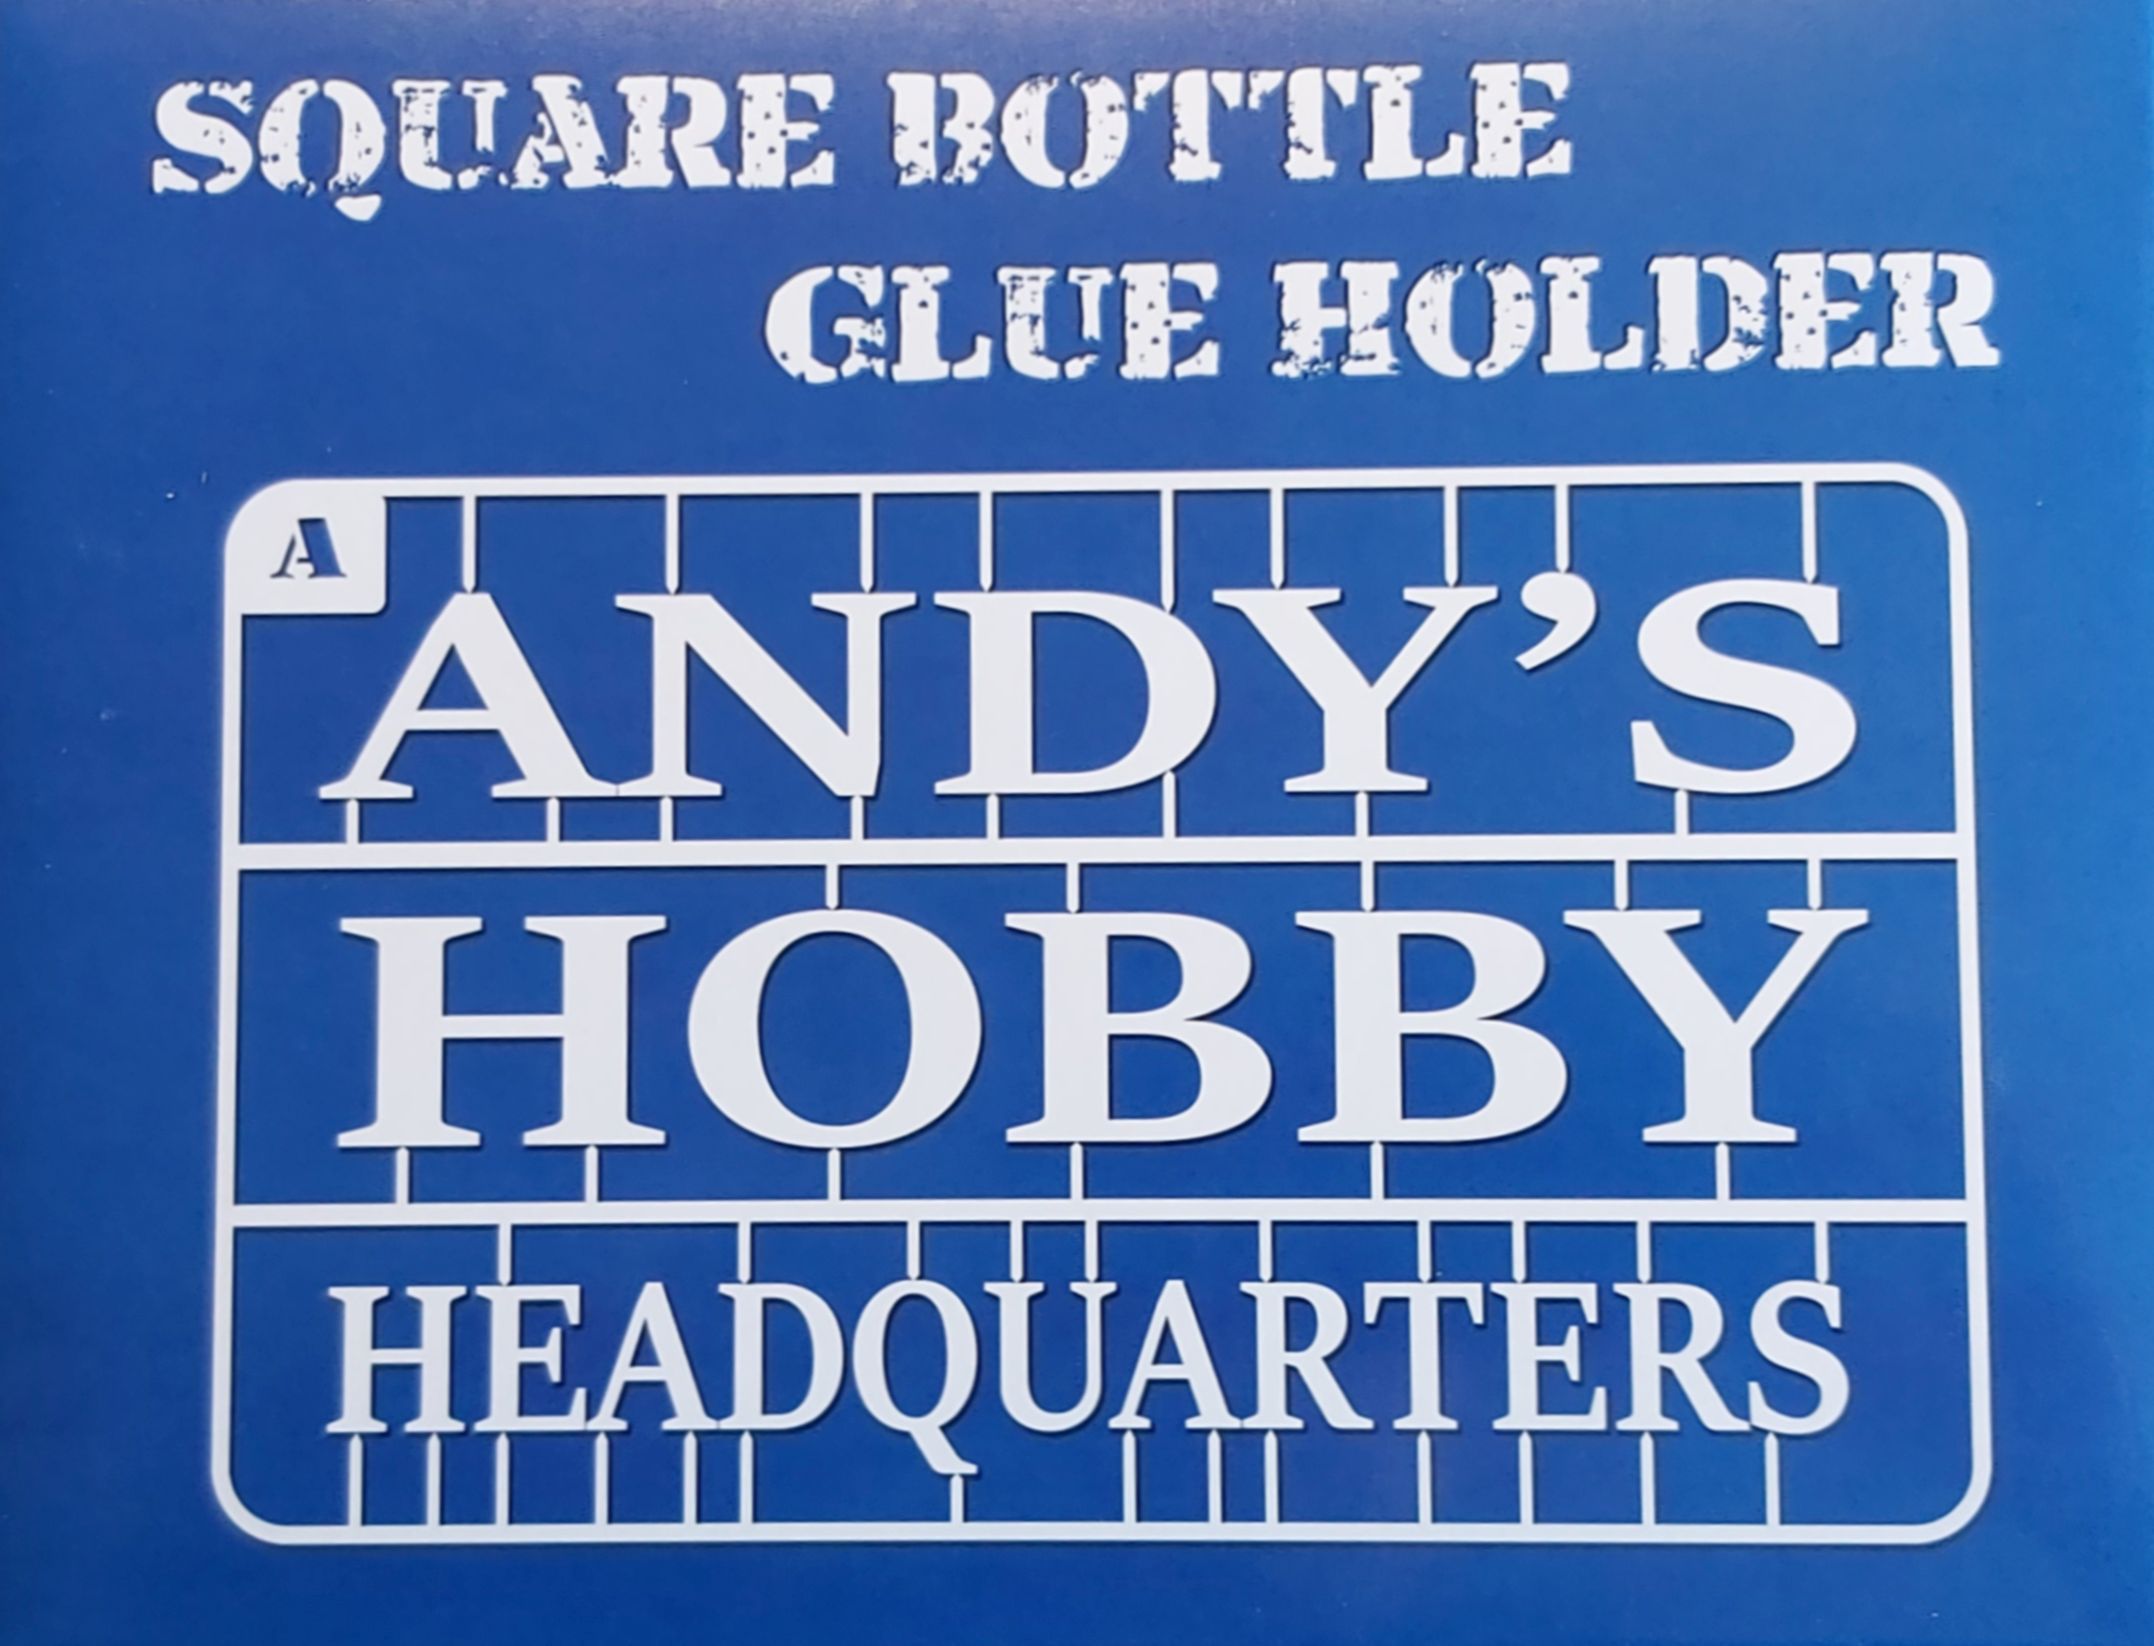 Andy's Hobby Headquarters' Square Bottle Glue Holder